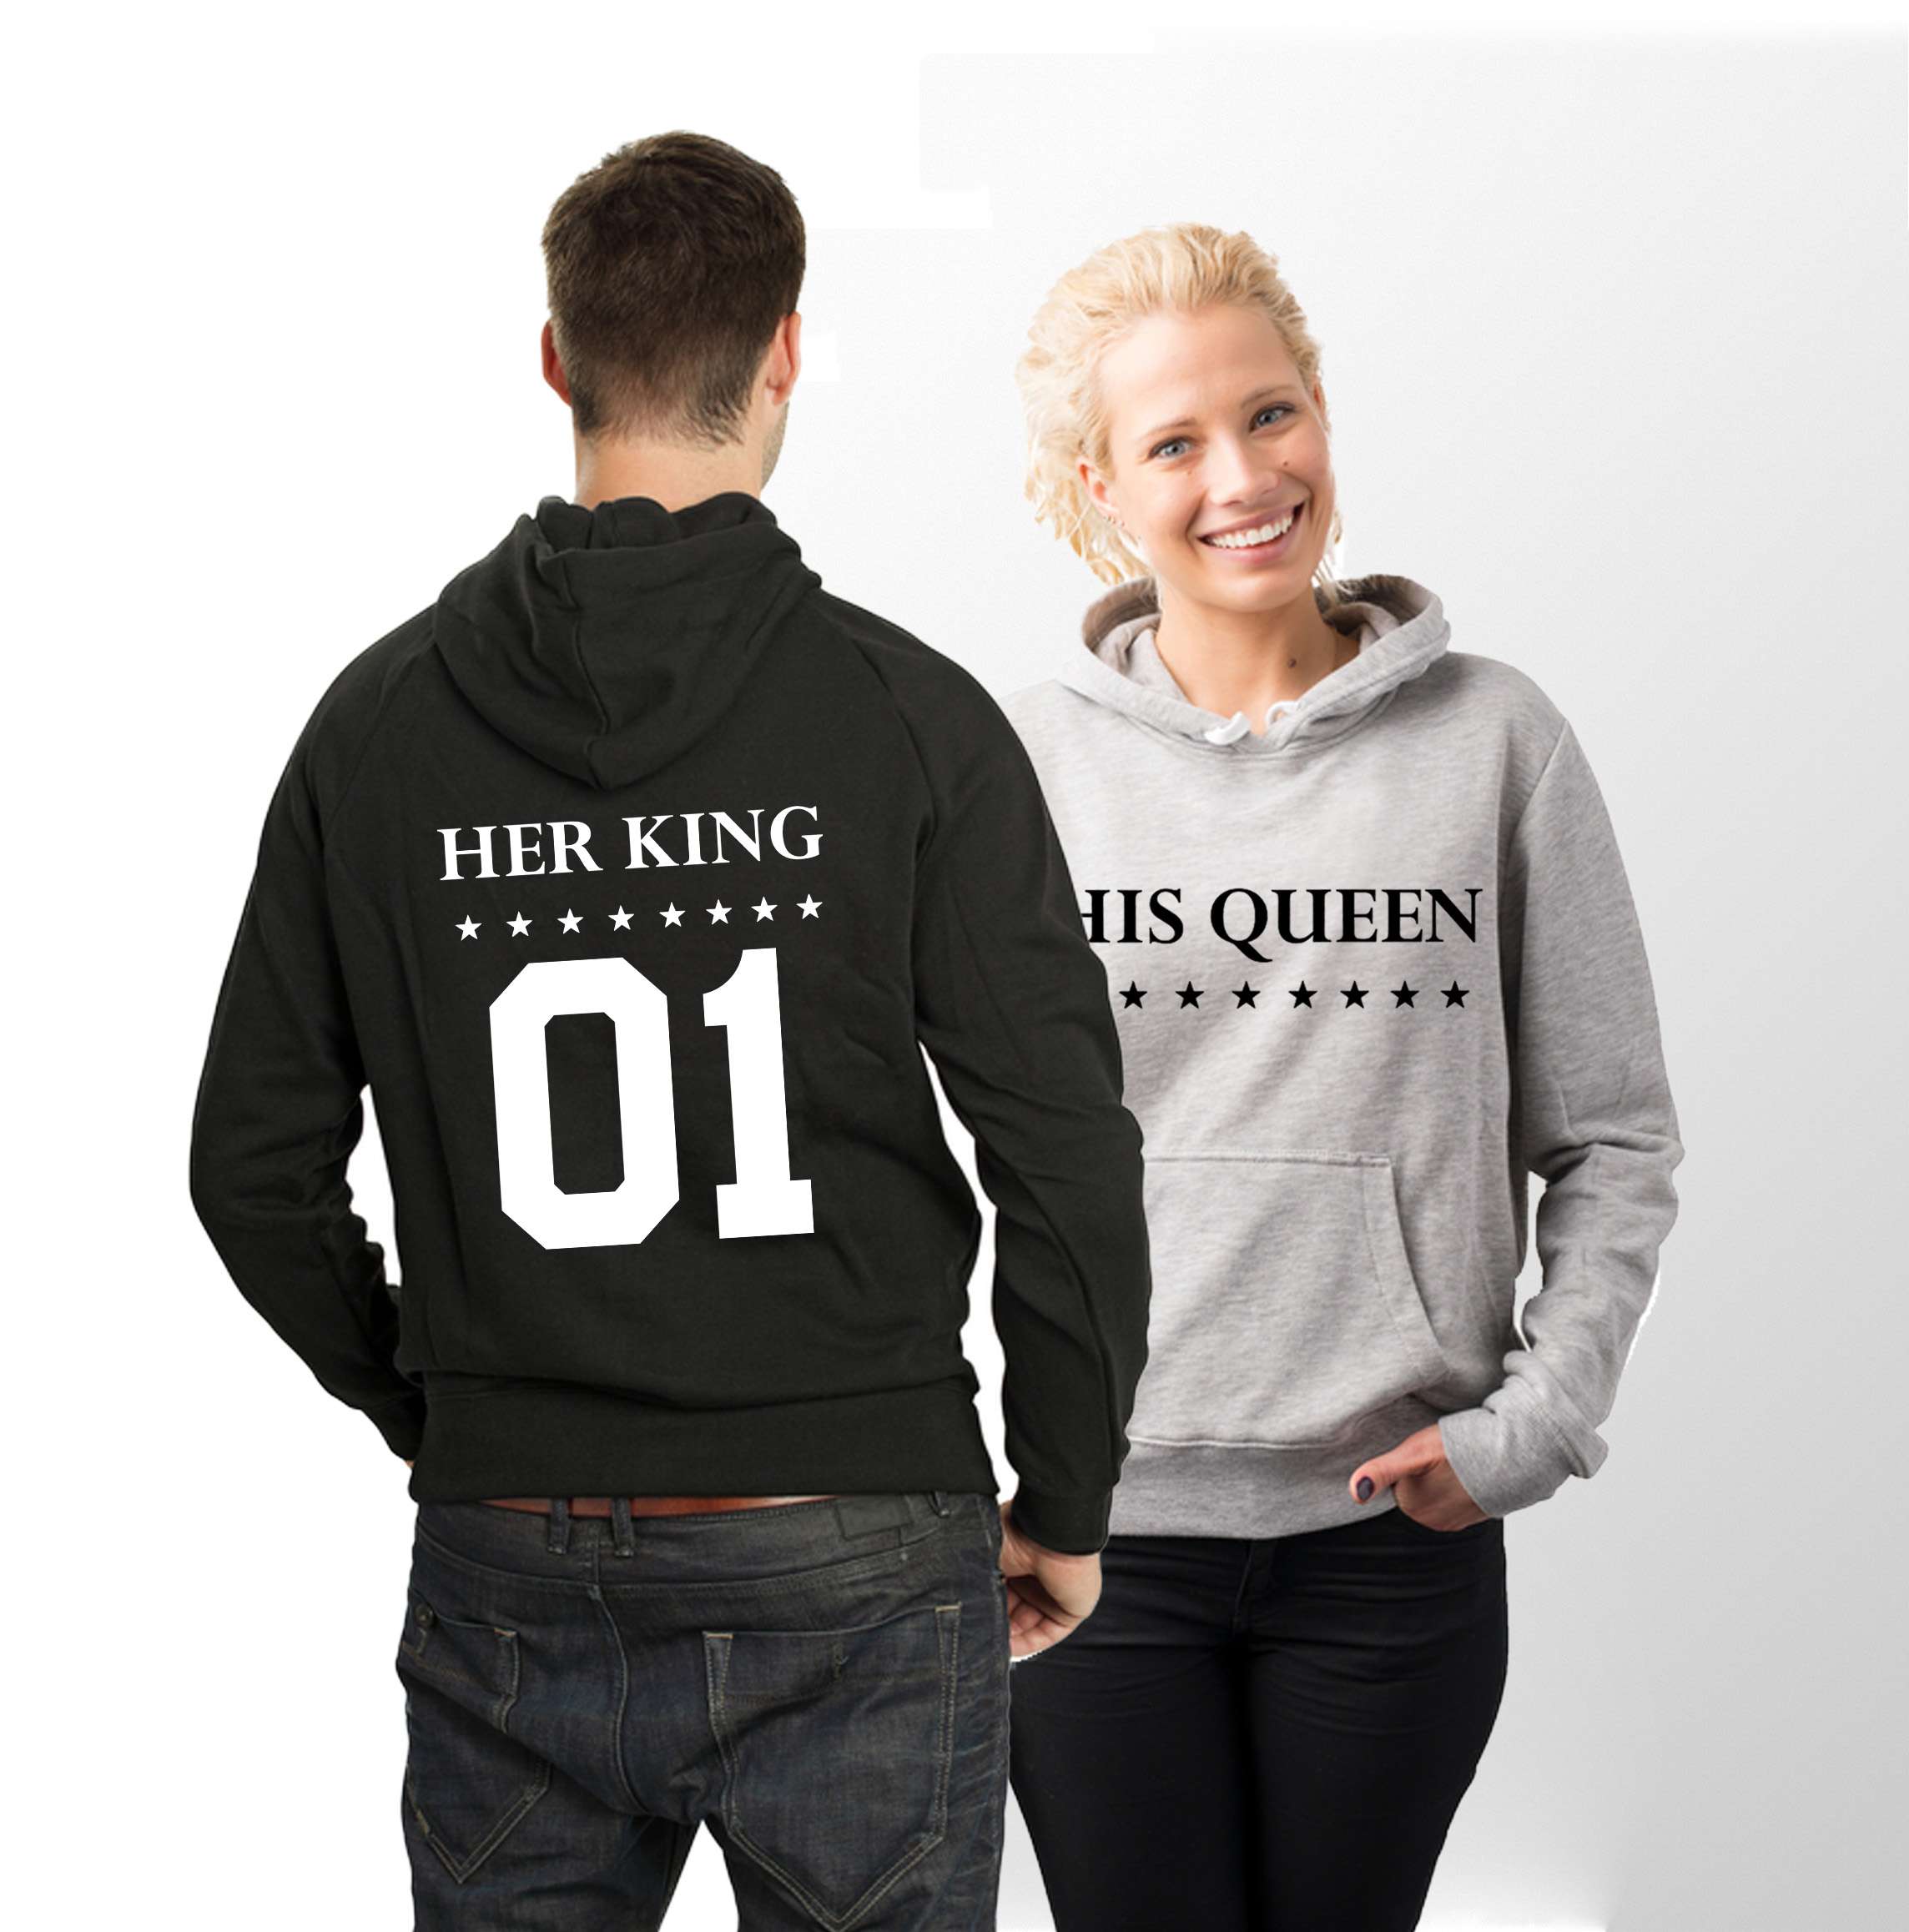 His and Hers King and Queen King and Queen Couples Her King and His Queen Couple Hoodie 